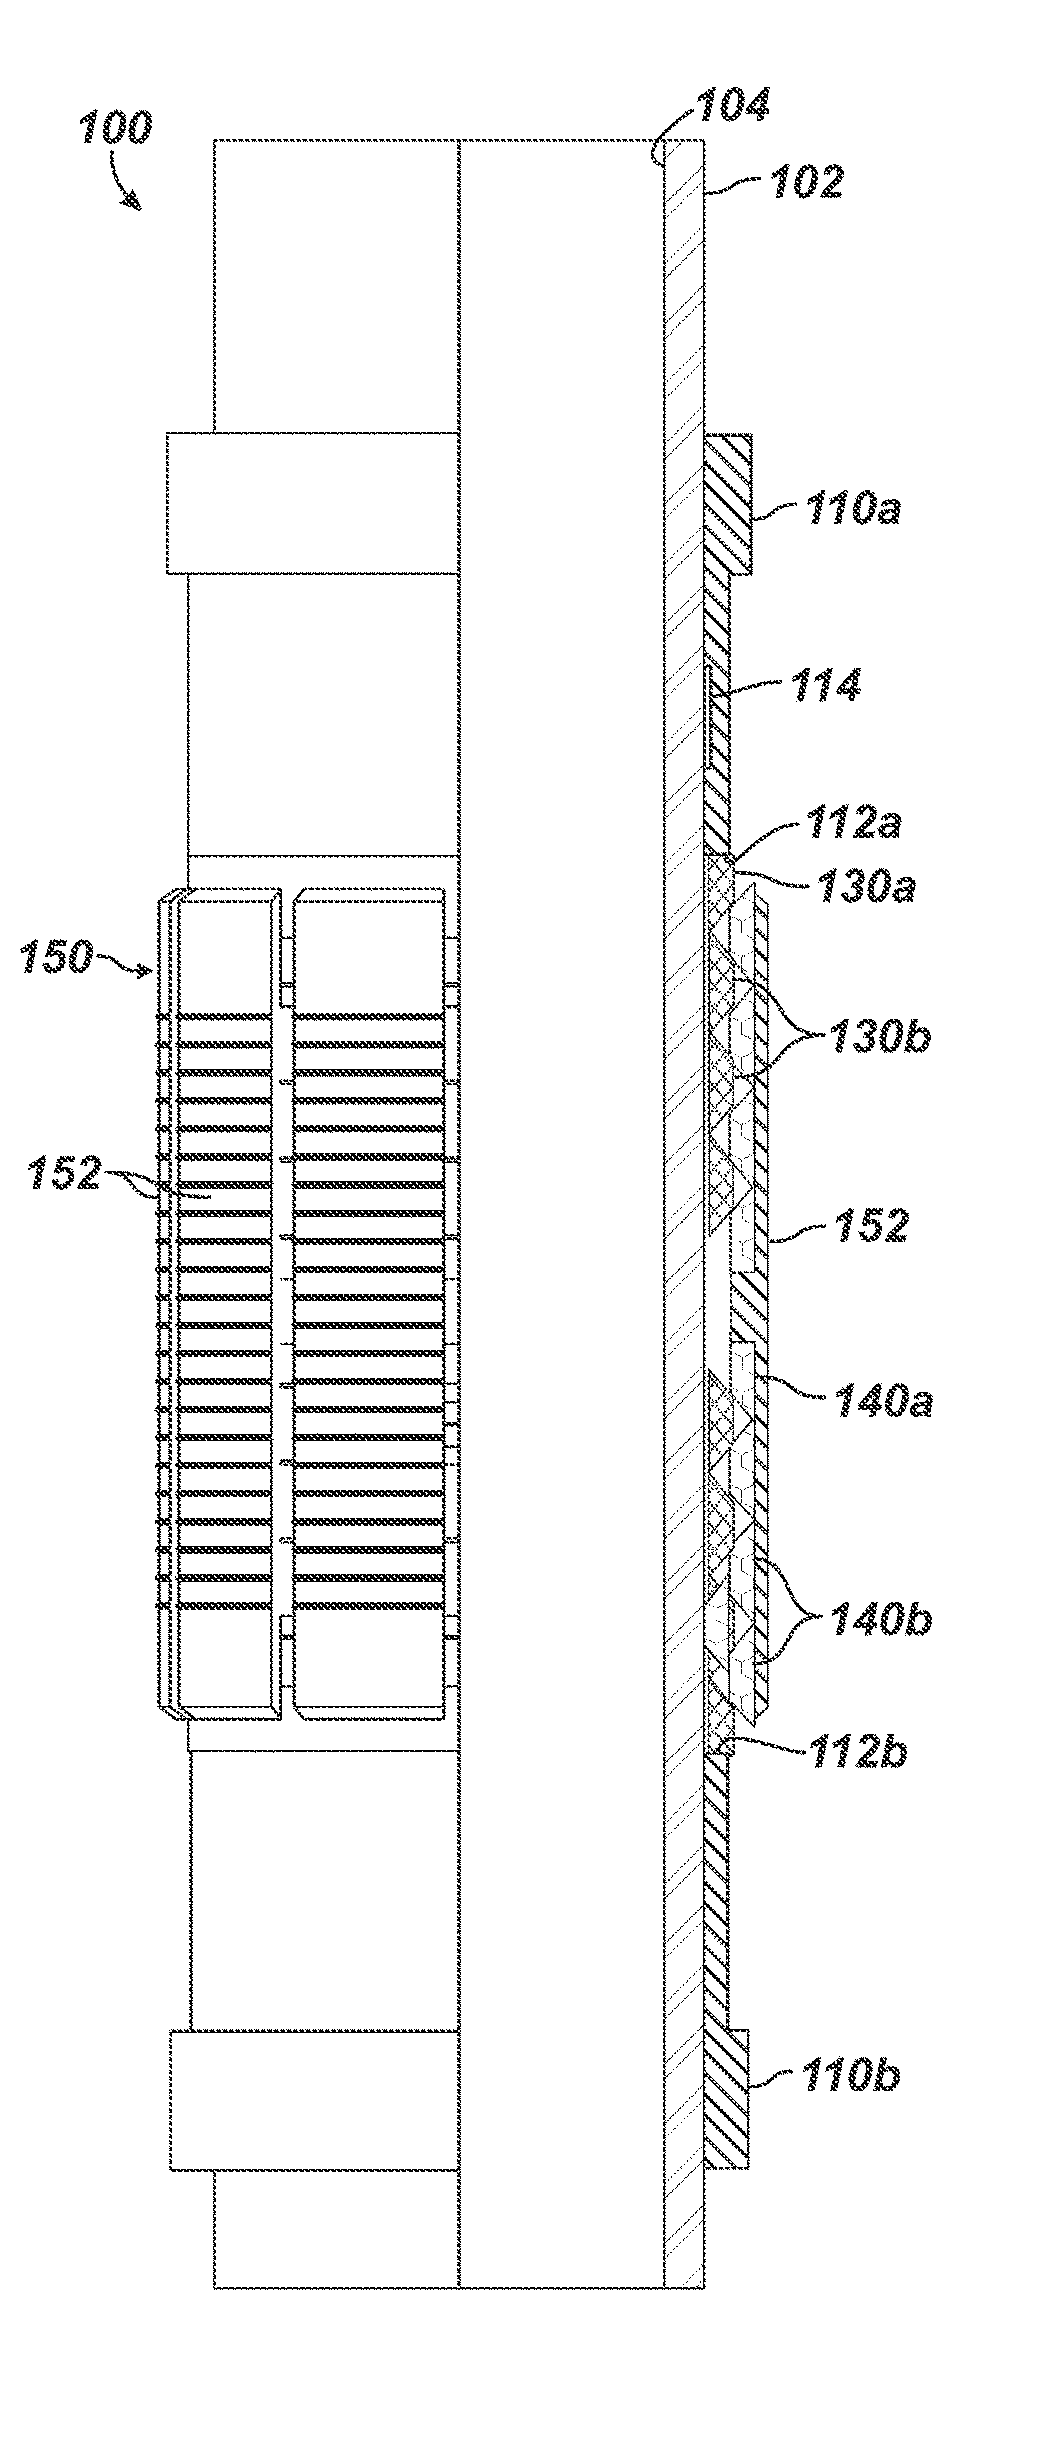 Downhole Tool having Slips Set by Stacked Rings